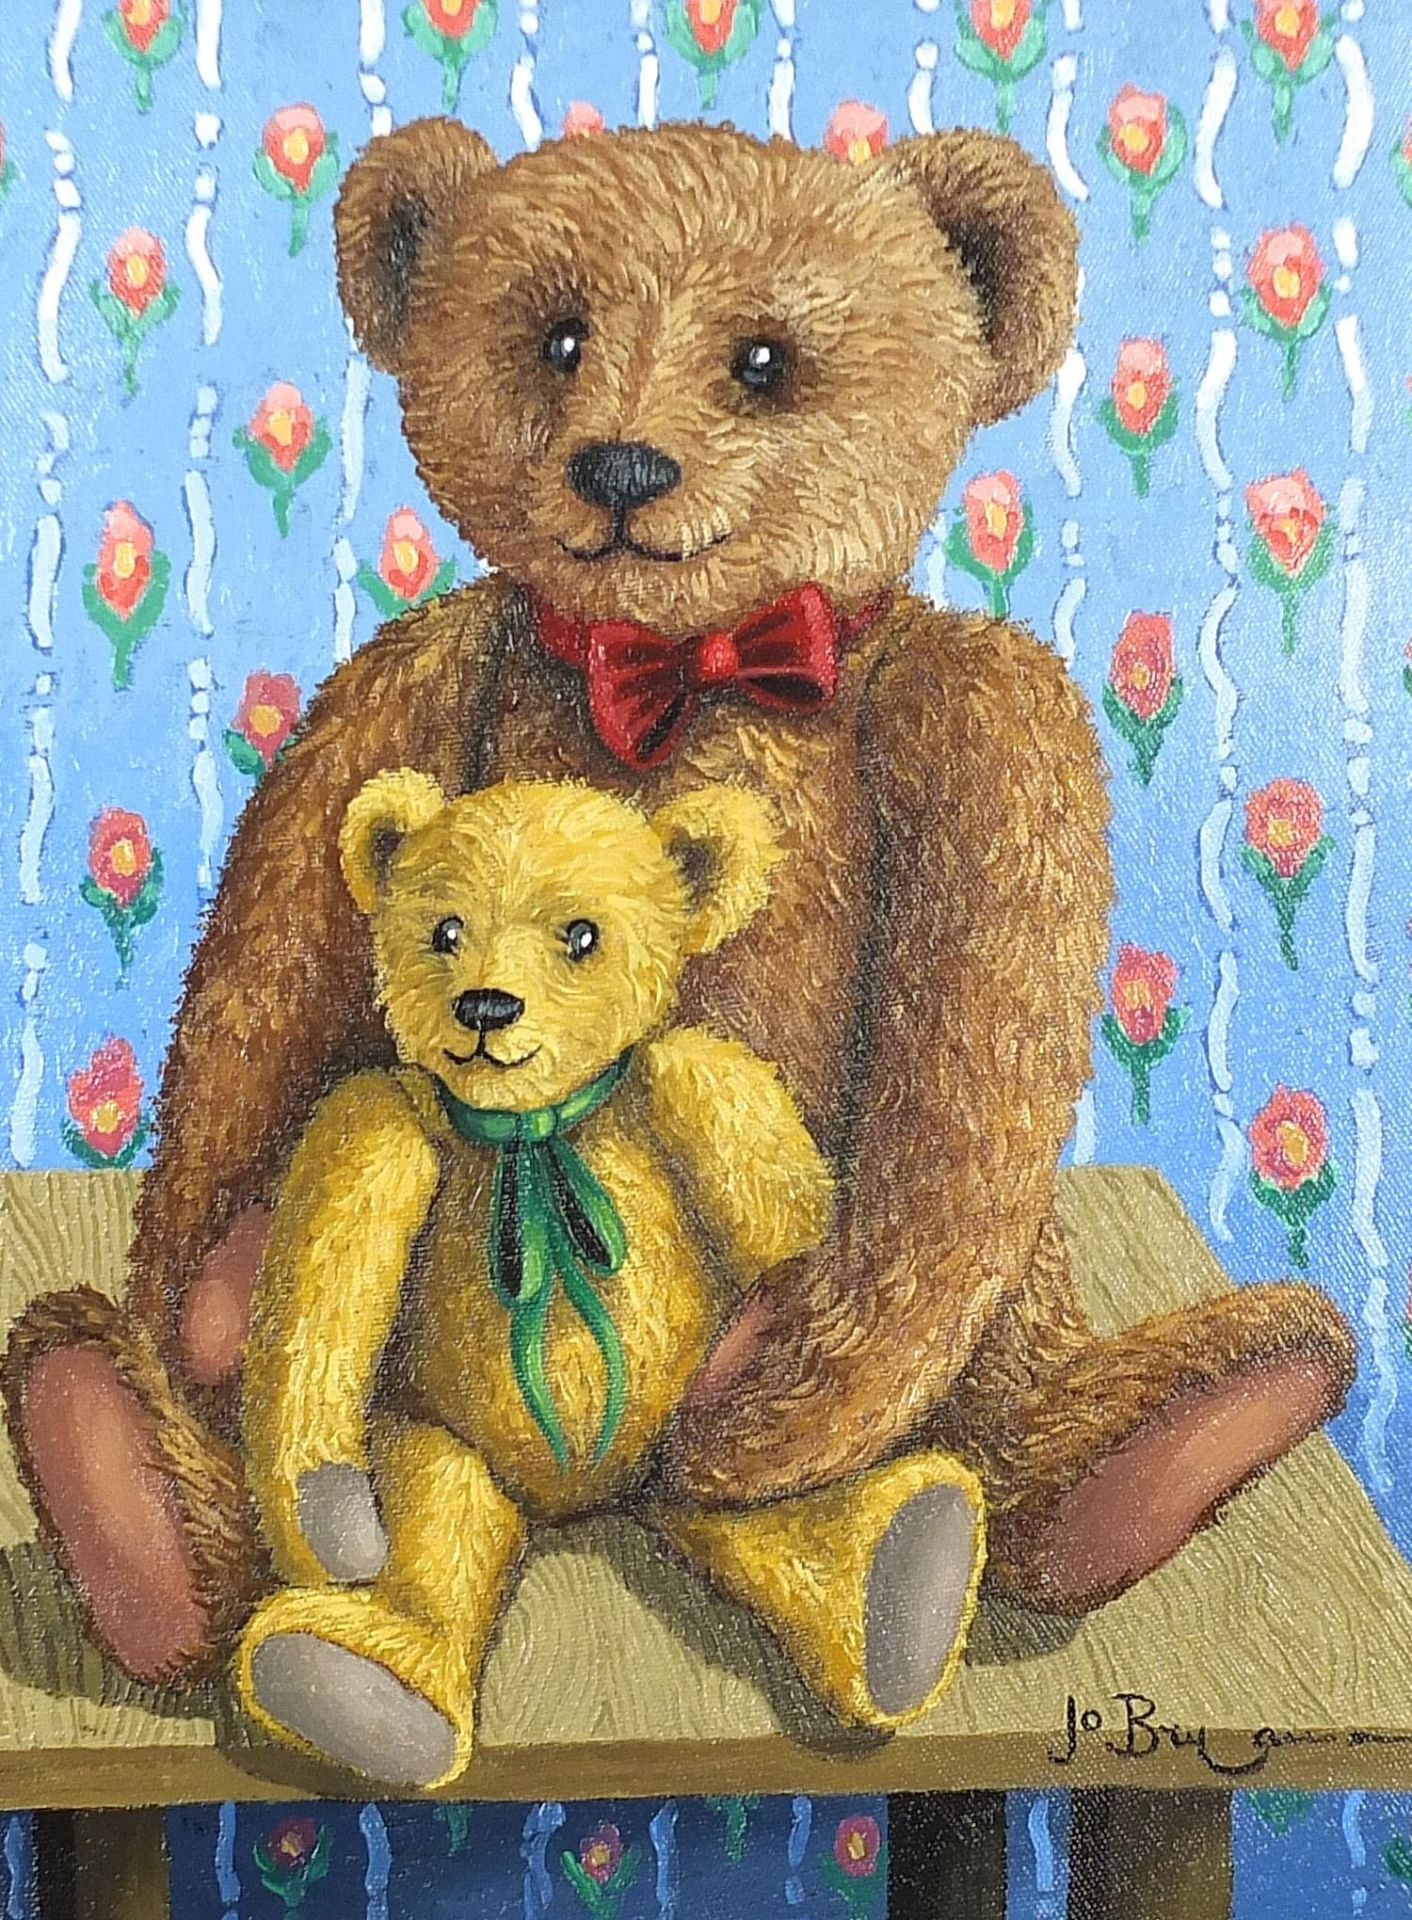 Jo Bryan - Best of Friends, teddy bear, oil on canvas, mounted and framed, 39cm x 29cm excluding the